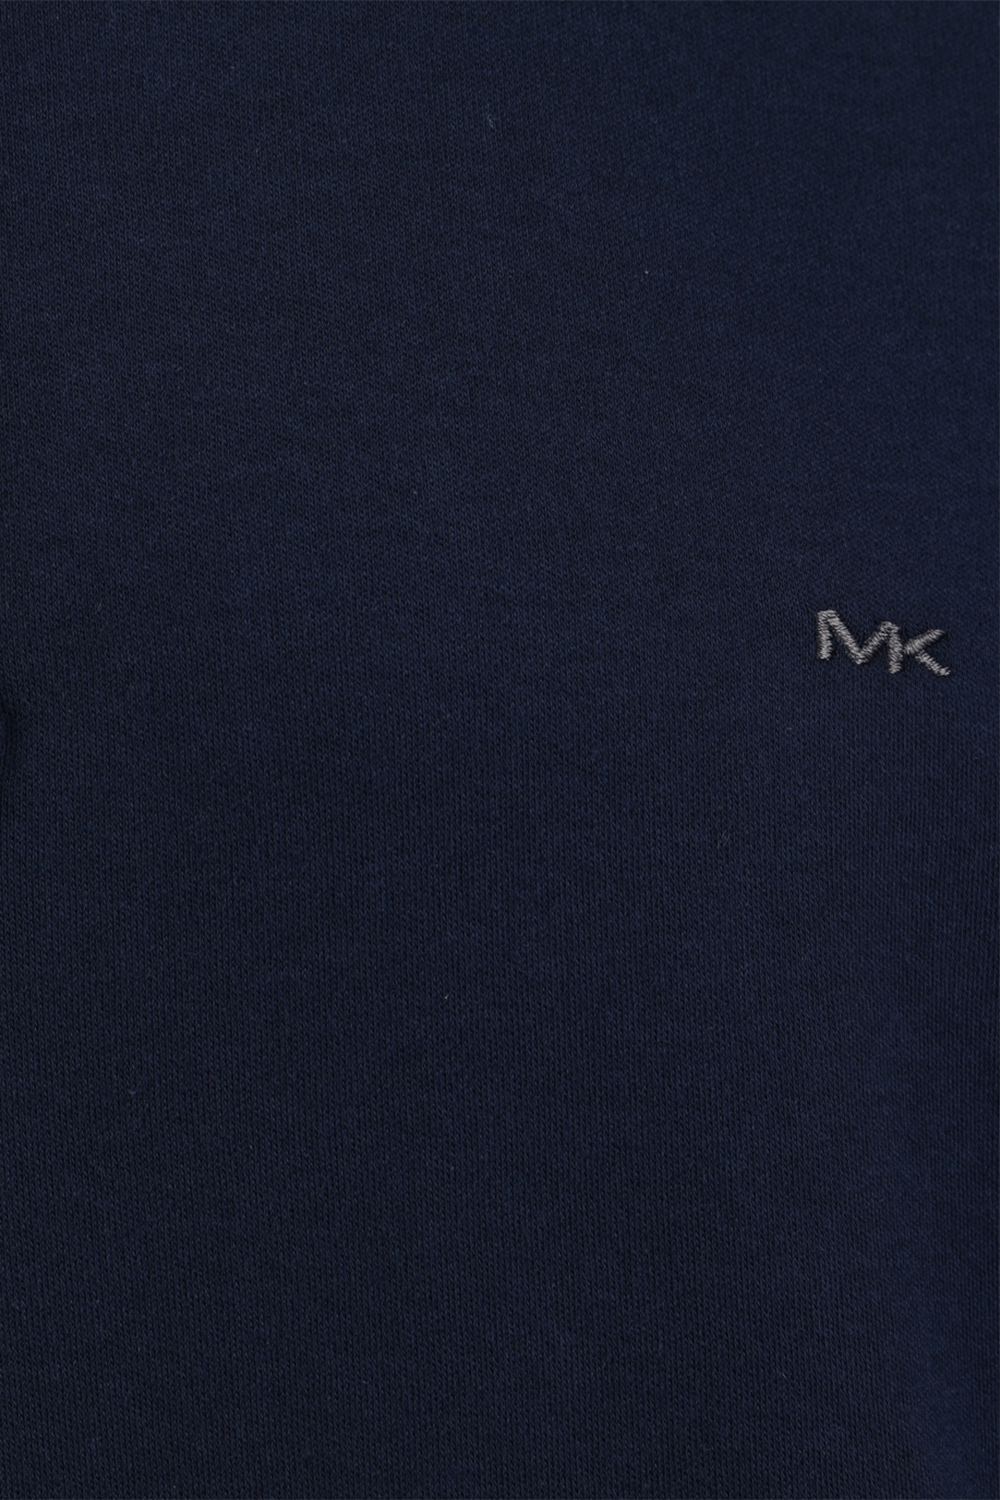 Sleek Polo Shirt With Short Sleeves In Navy MICHAEL KORS